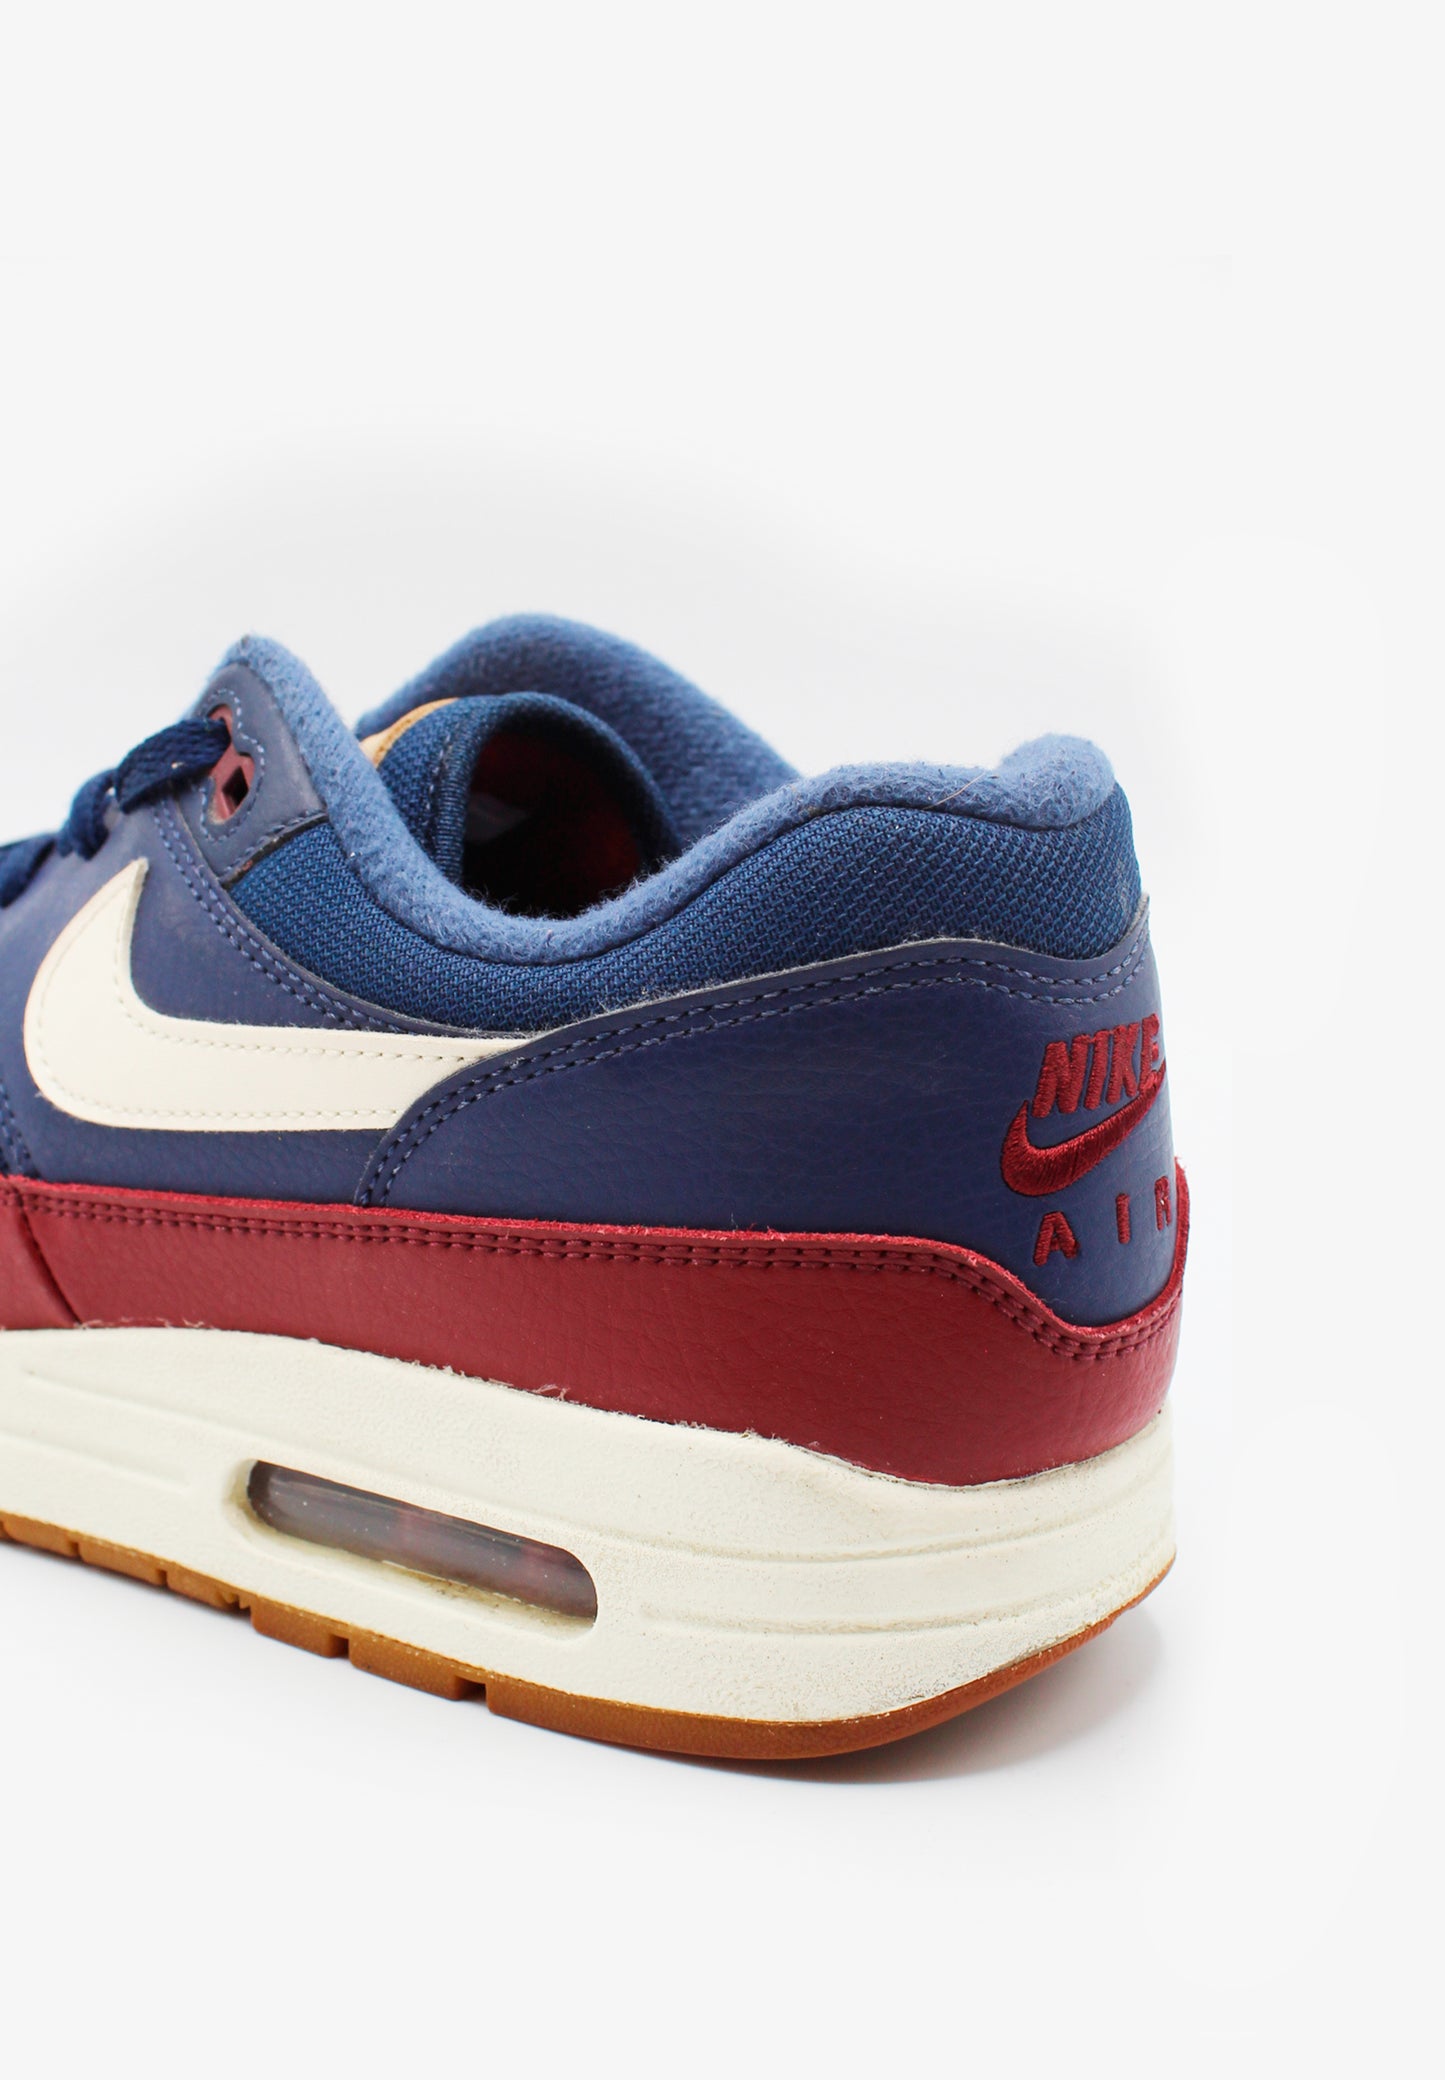 ARCHIVE SNEAKRS | SNEAKERS NIKE AIR MAX 1 TALLA 41